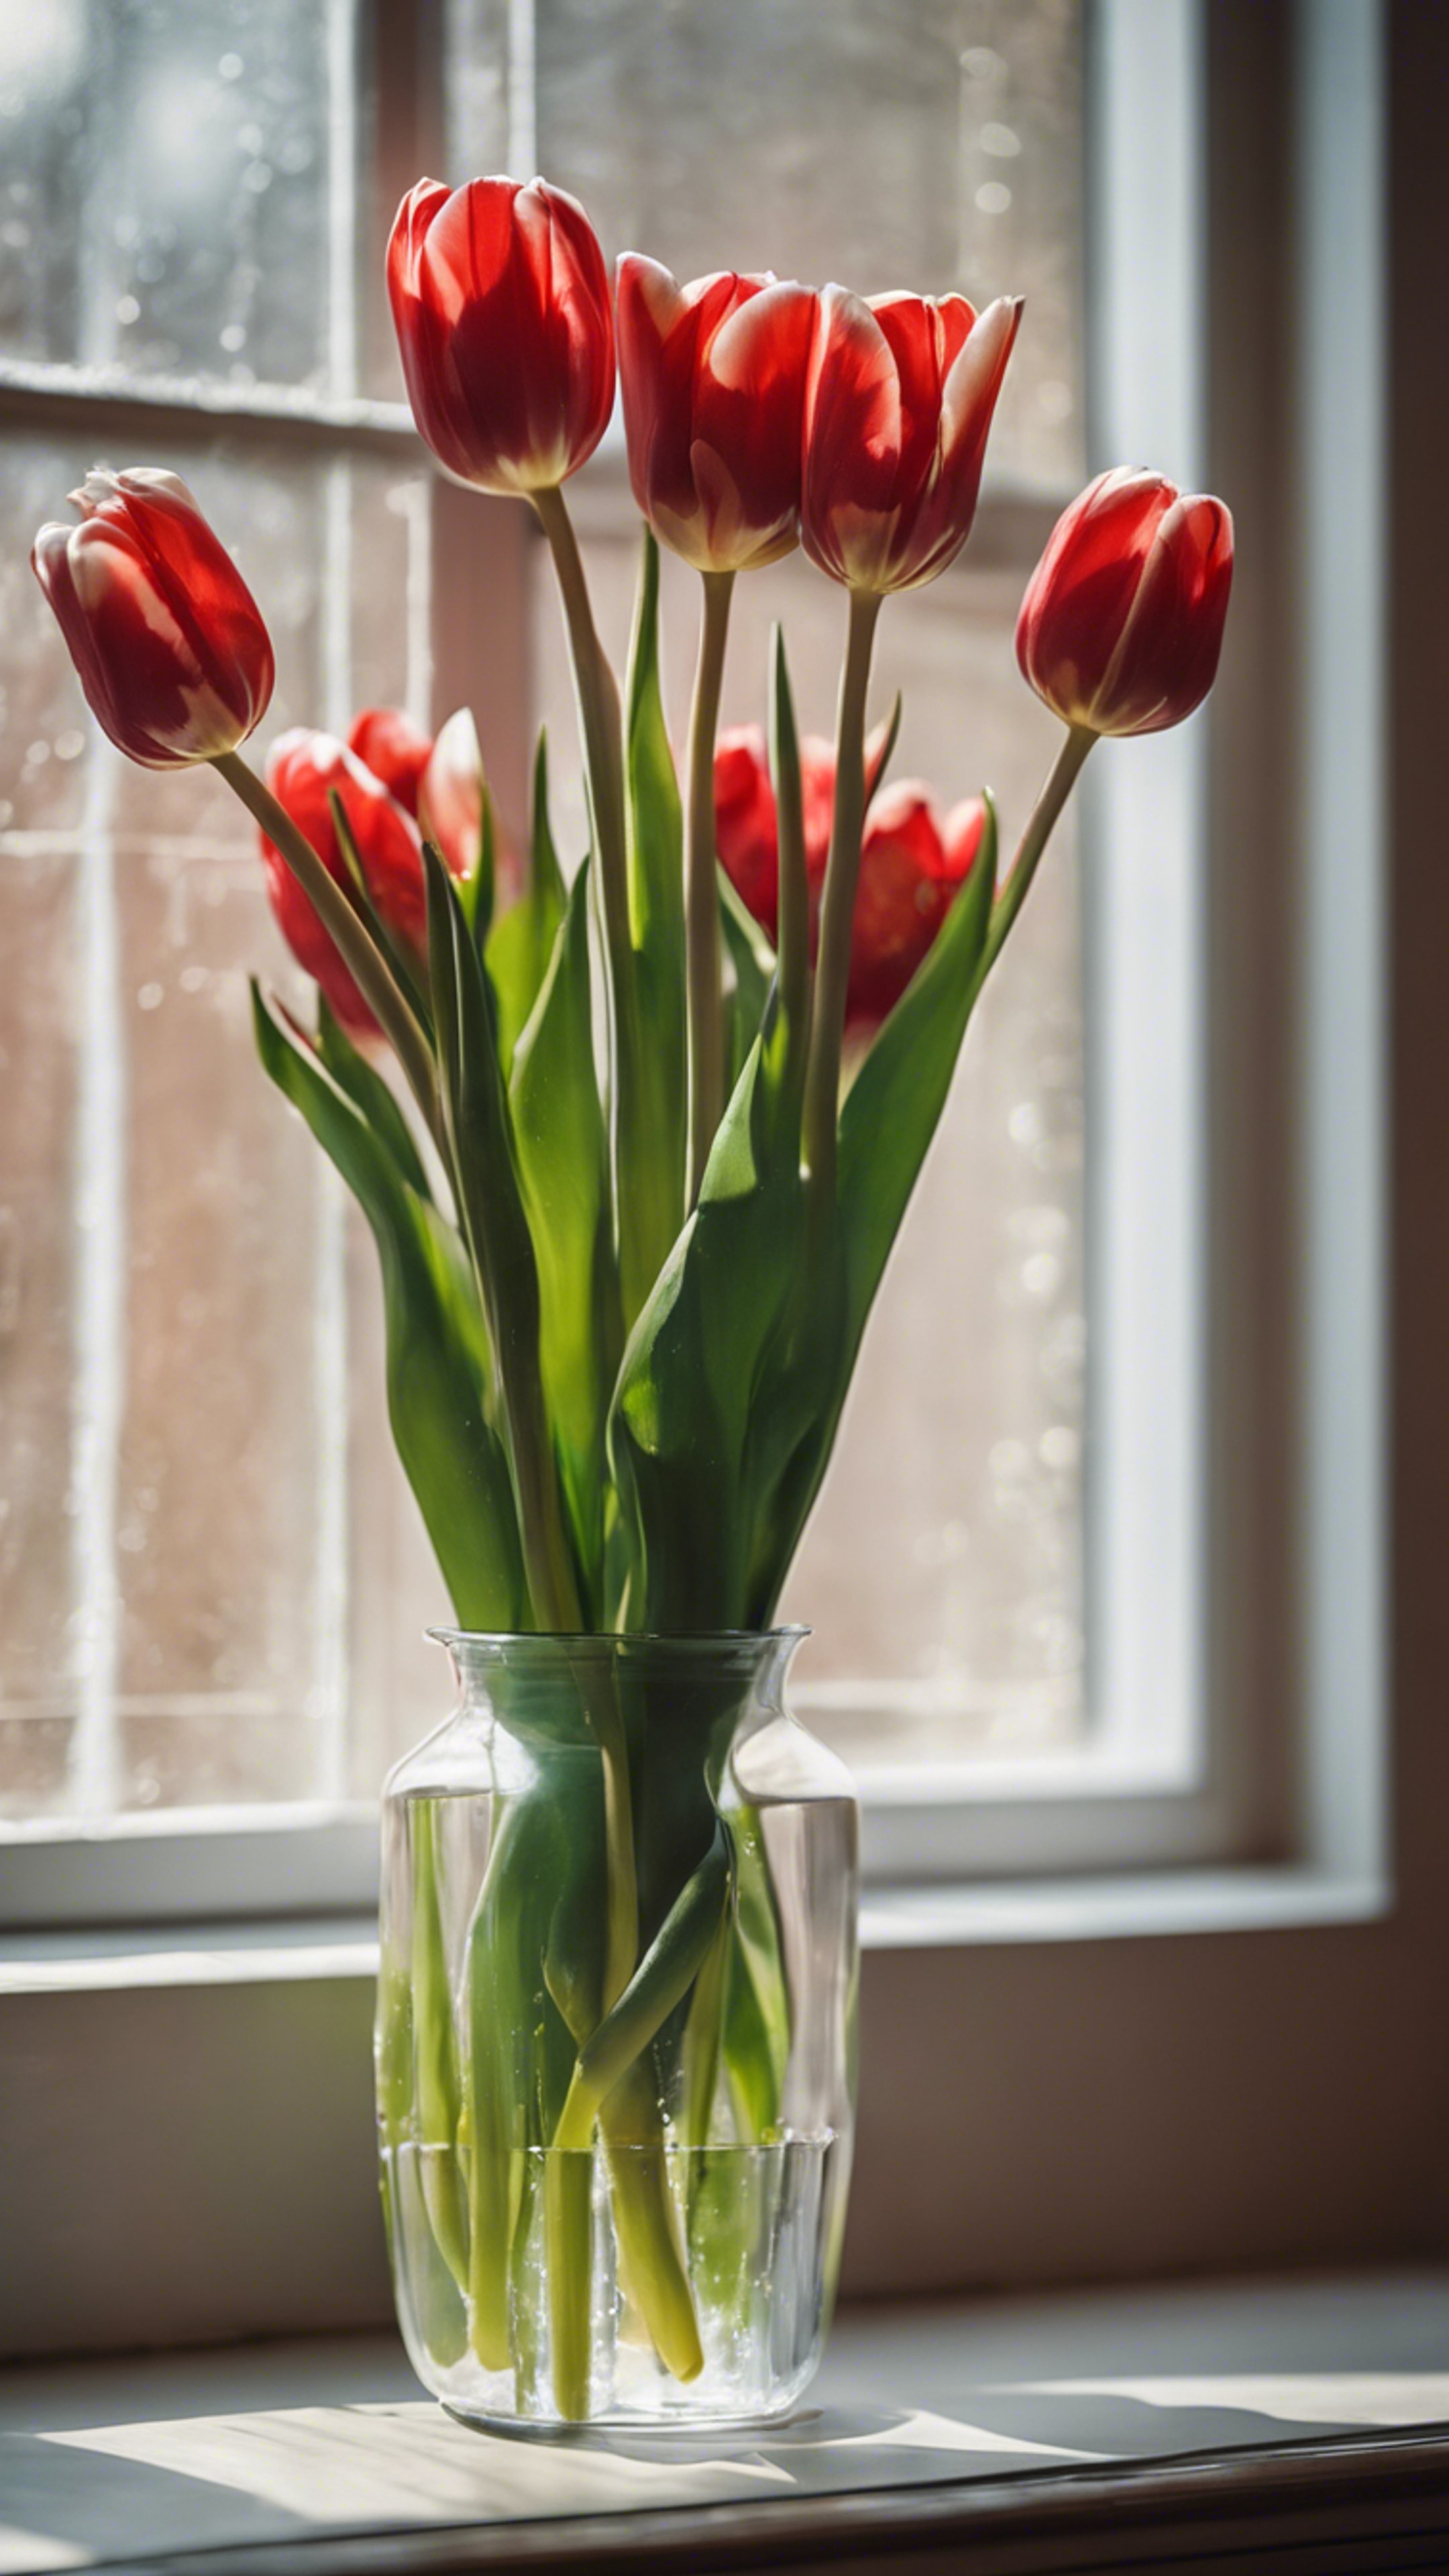 A bunch of vivid red and white tulips in a glass vase, lit by natural light. Tapet[fc69acd6917c413b913f]